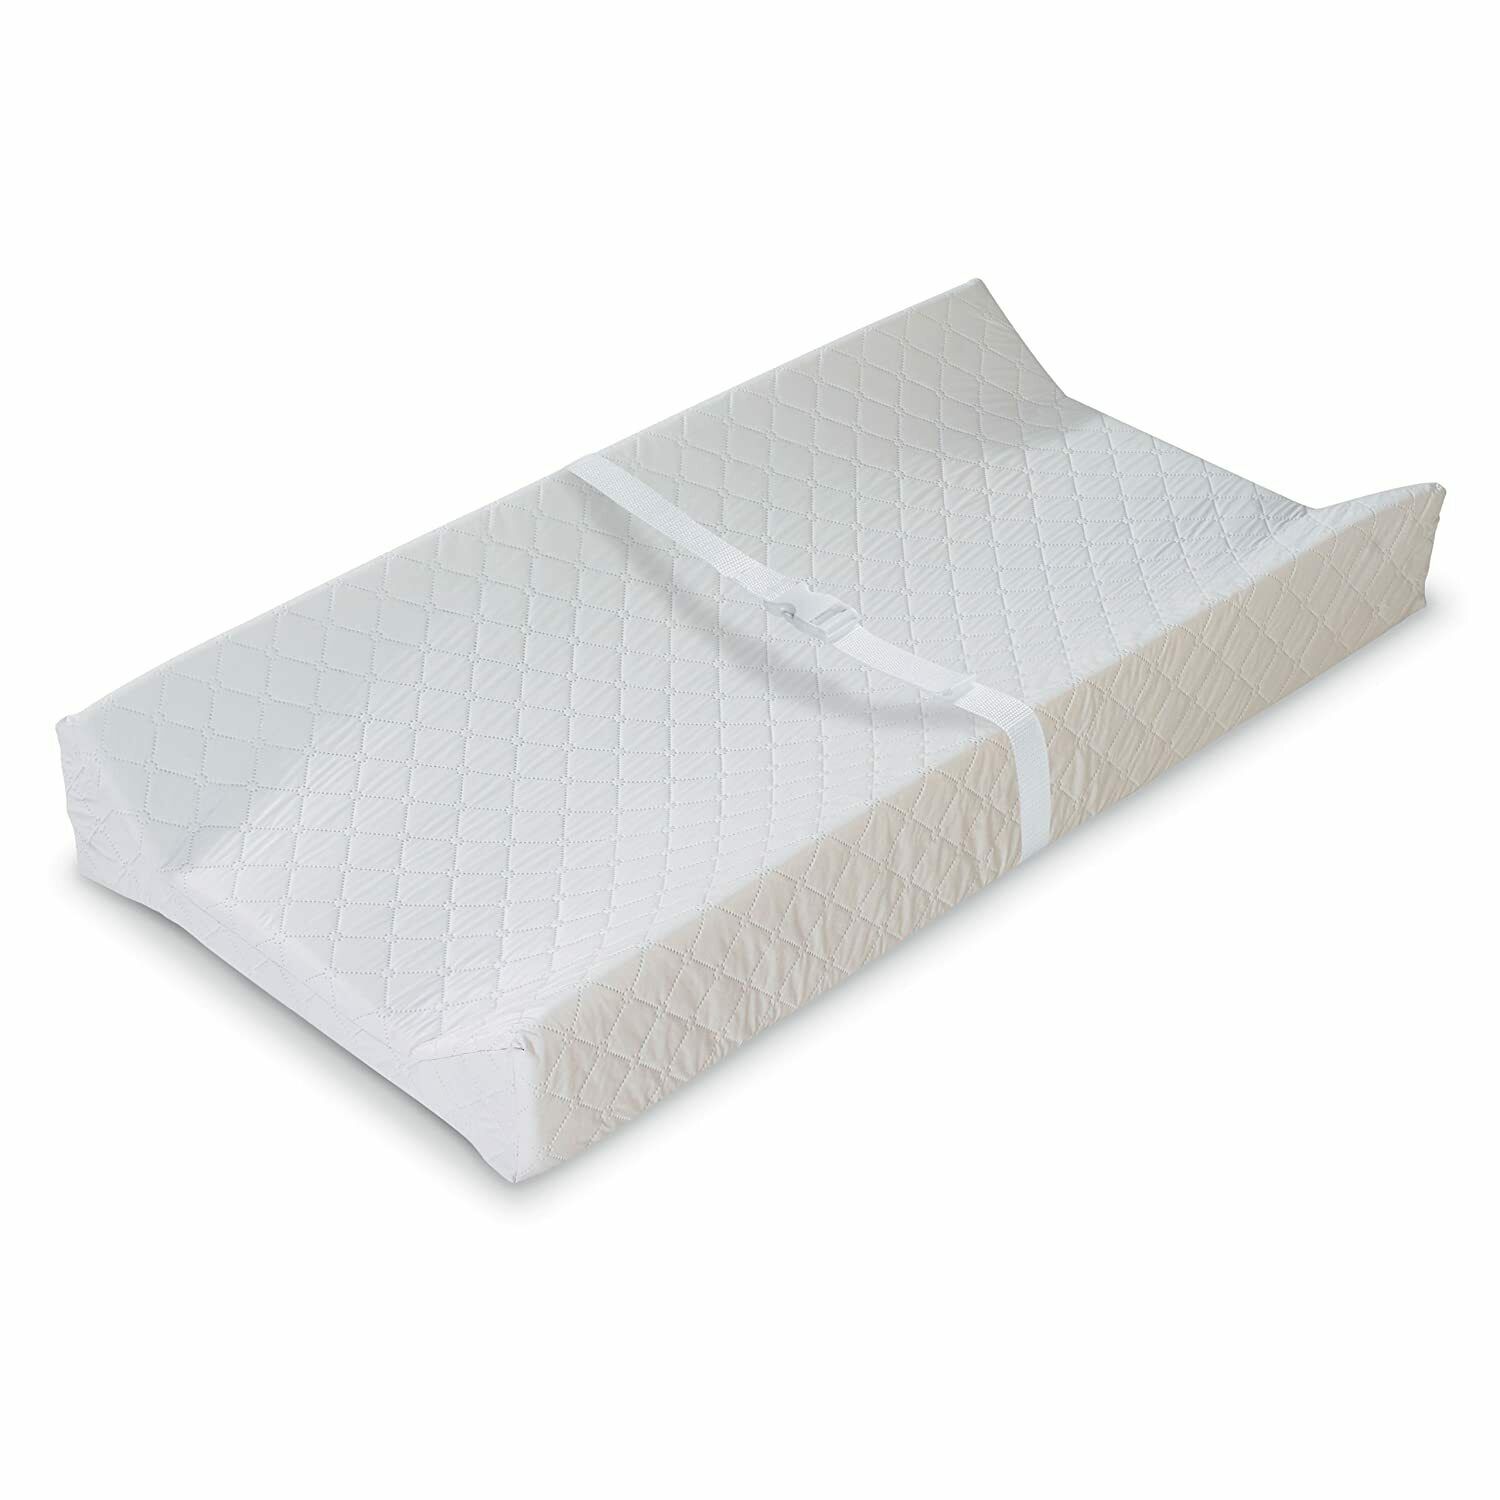 Summer Contoured Changing Pad 32 X 16 X 3.5 Inches